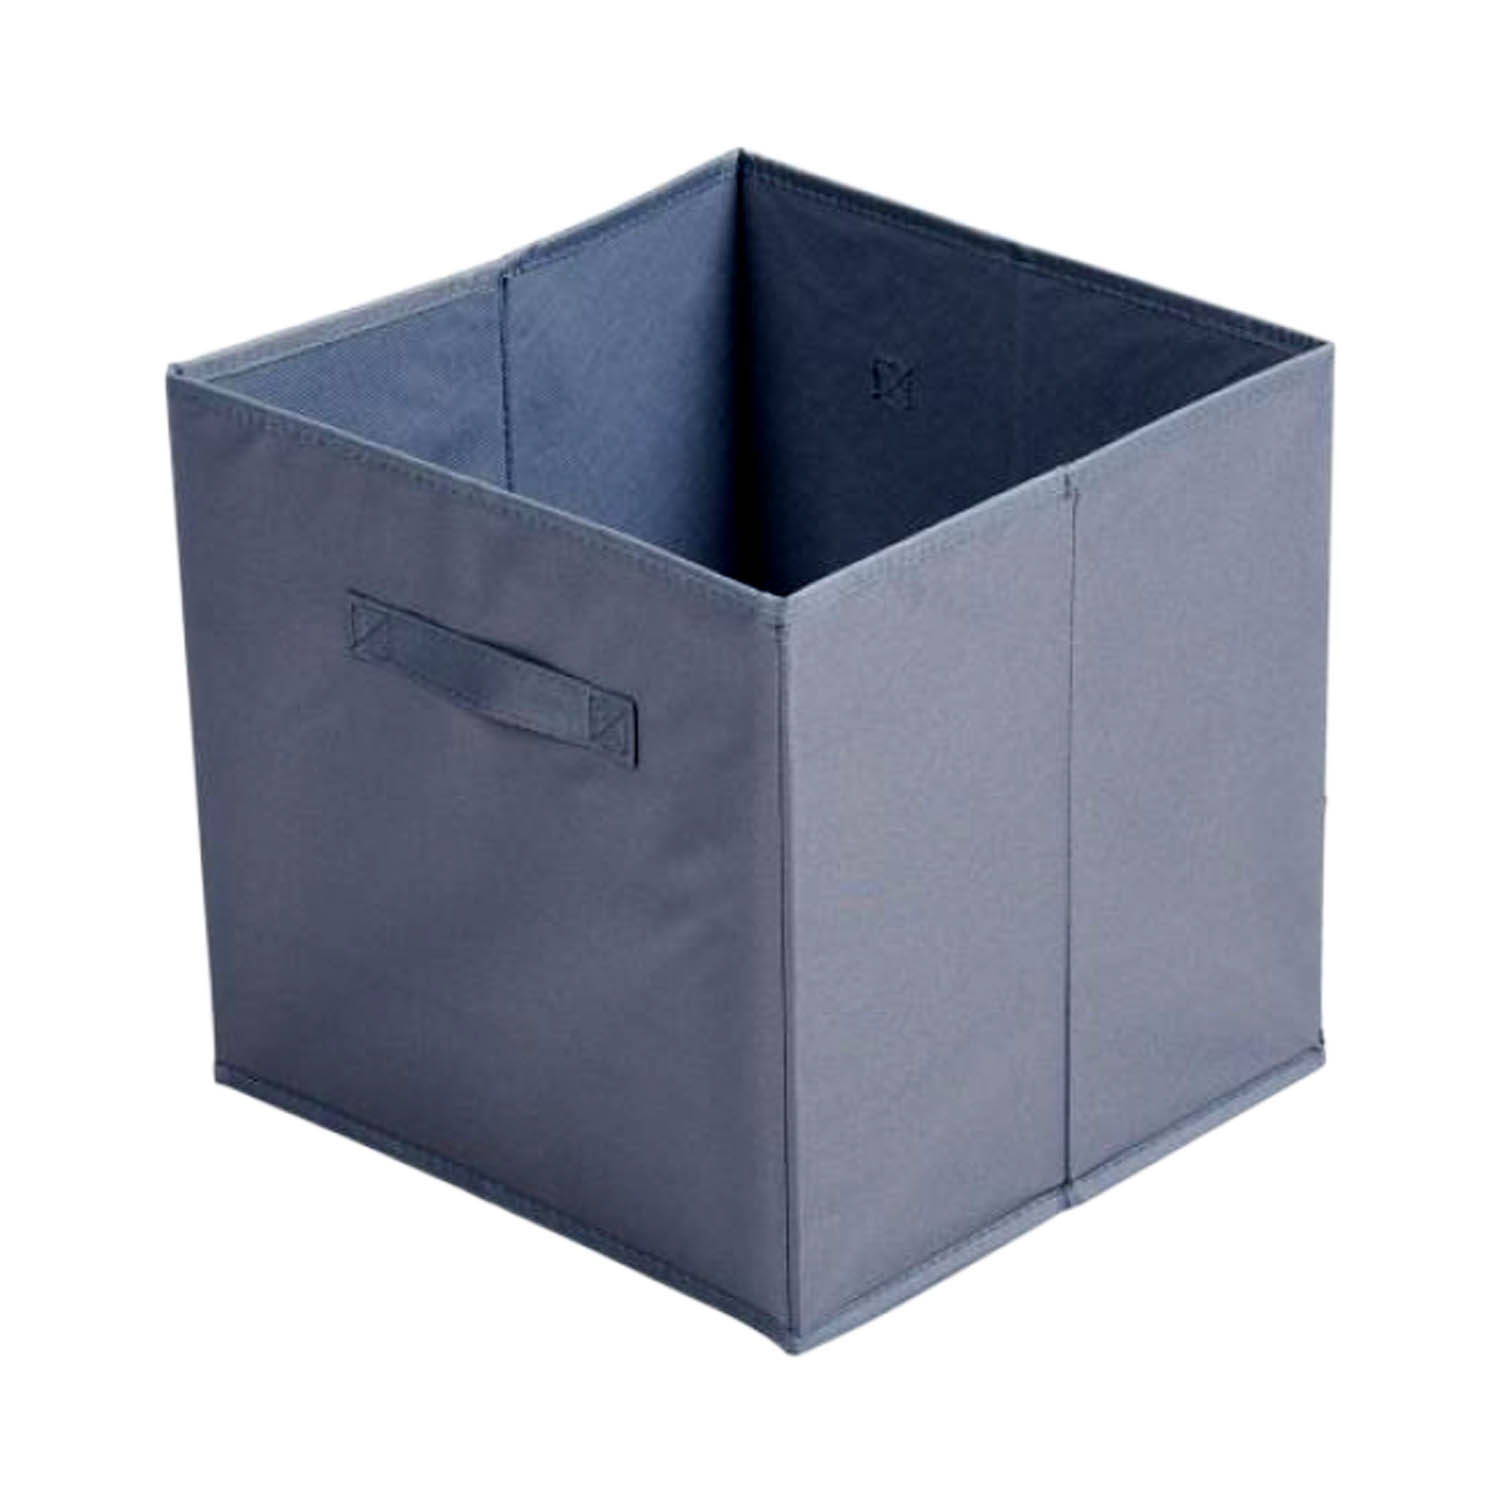 Collapsible Origami Box Details About Foldable Storage Rack Unit Collapsible Folding Box Home Clothes Organiser Shelf